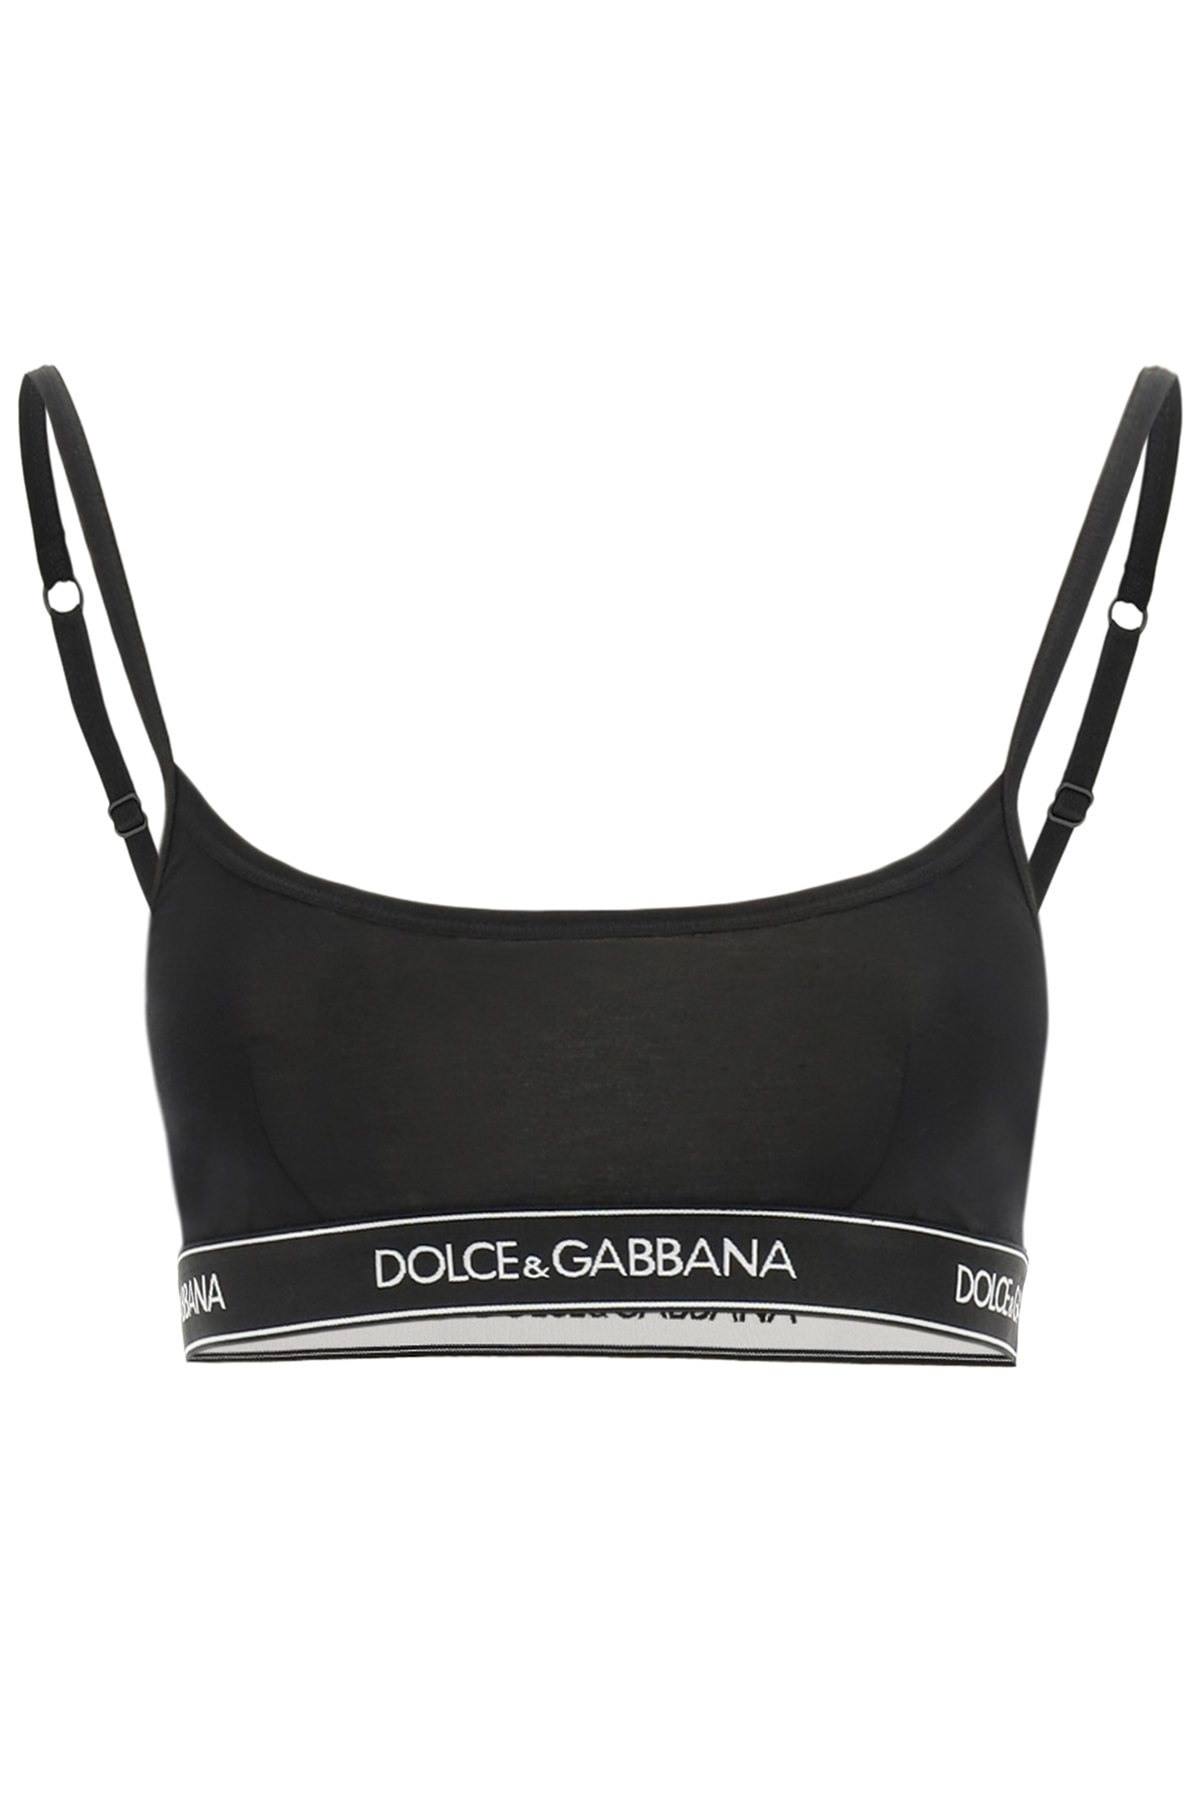 DOLCE & GABBANA BRASSIERE WITH LOGO BAND,O1B29T FUGJT N0000